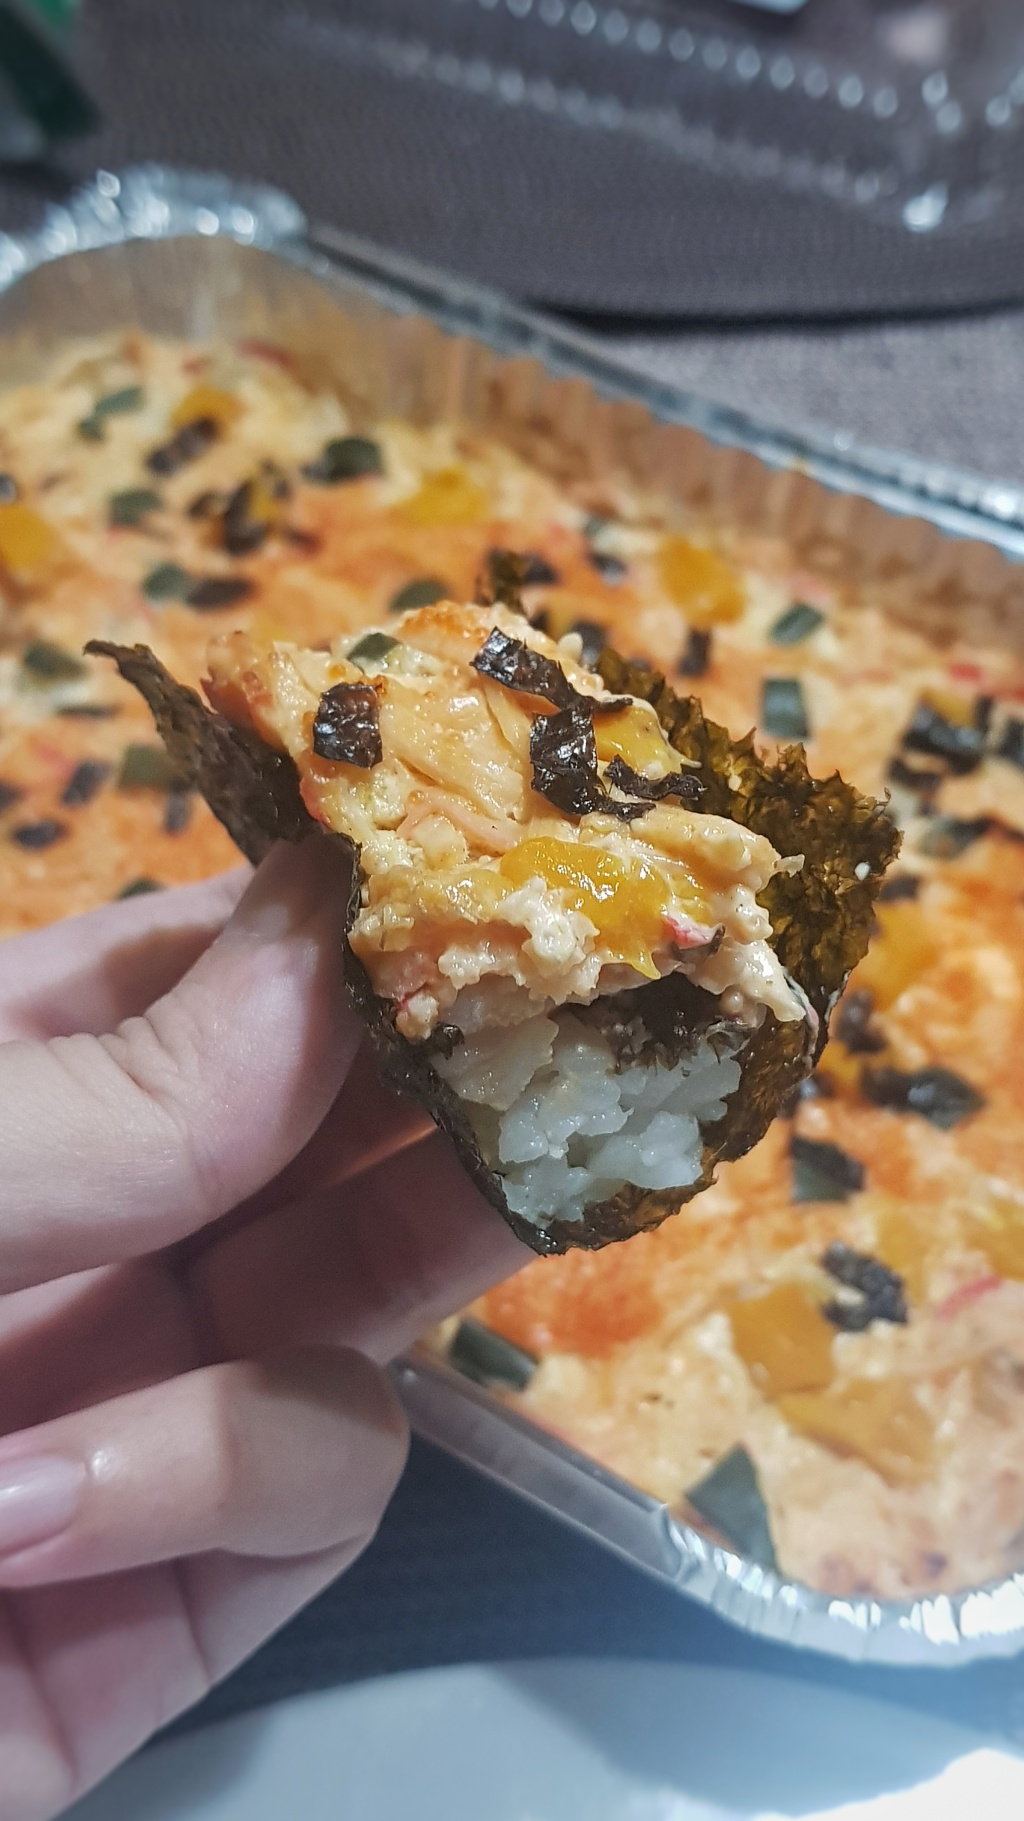 #2021Review: Sushi Bake by Keiks Bakes